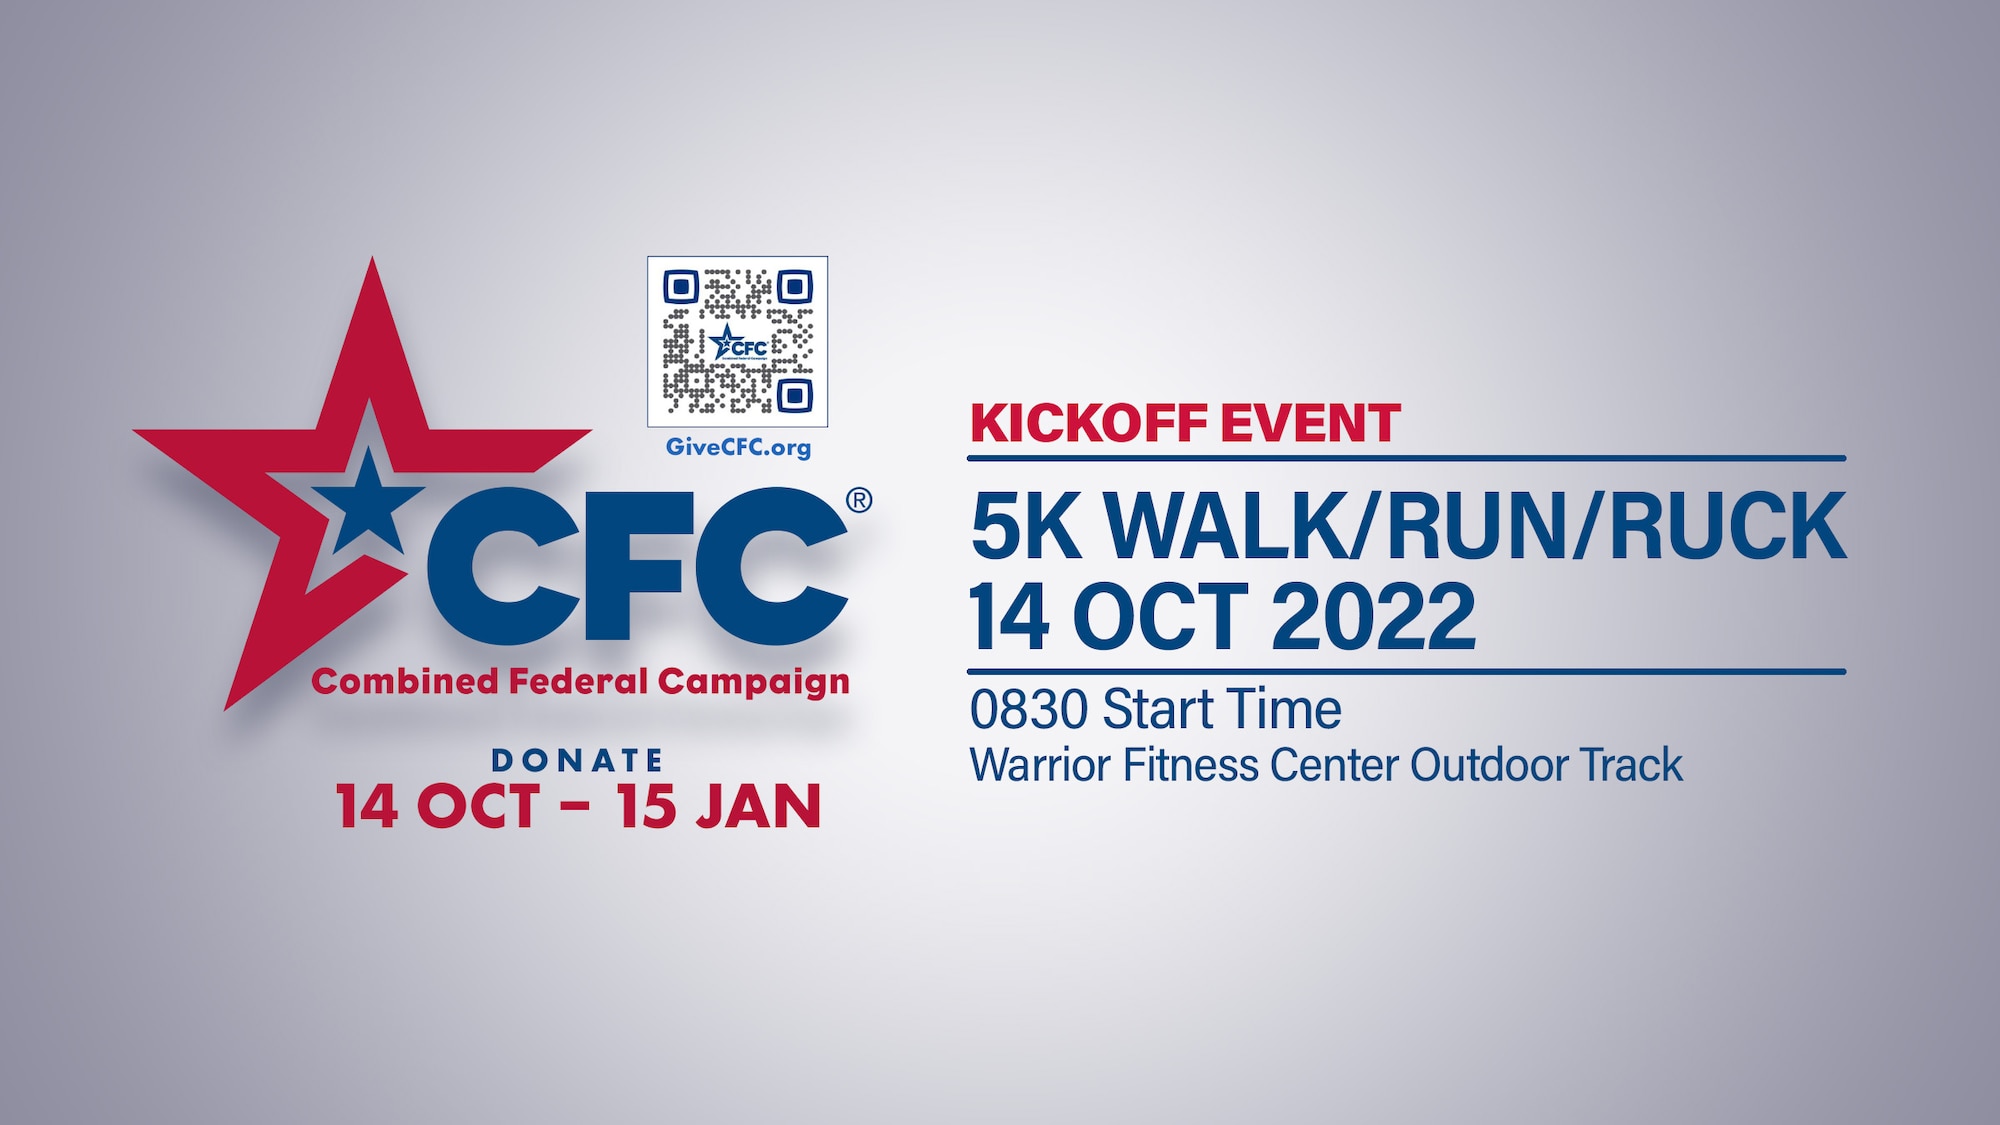 A graphic depicting the CFC logo and 5K kickoff event information.